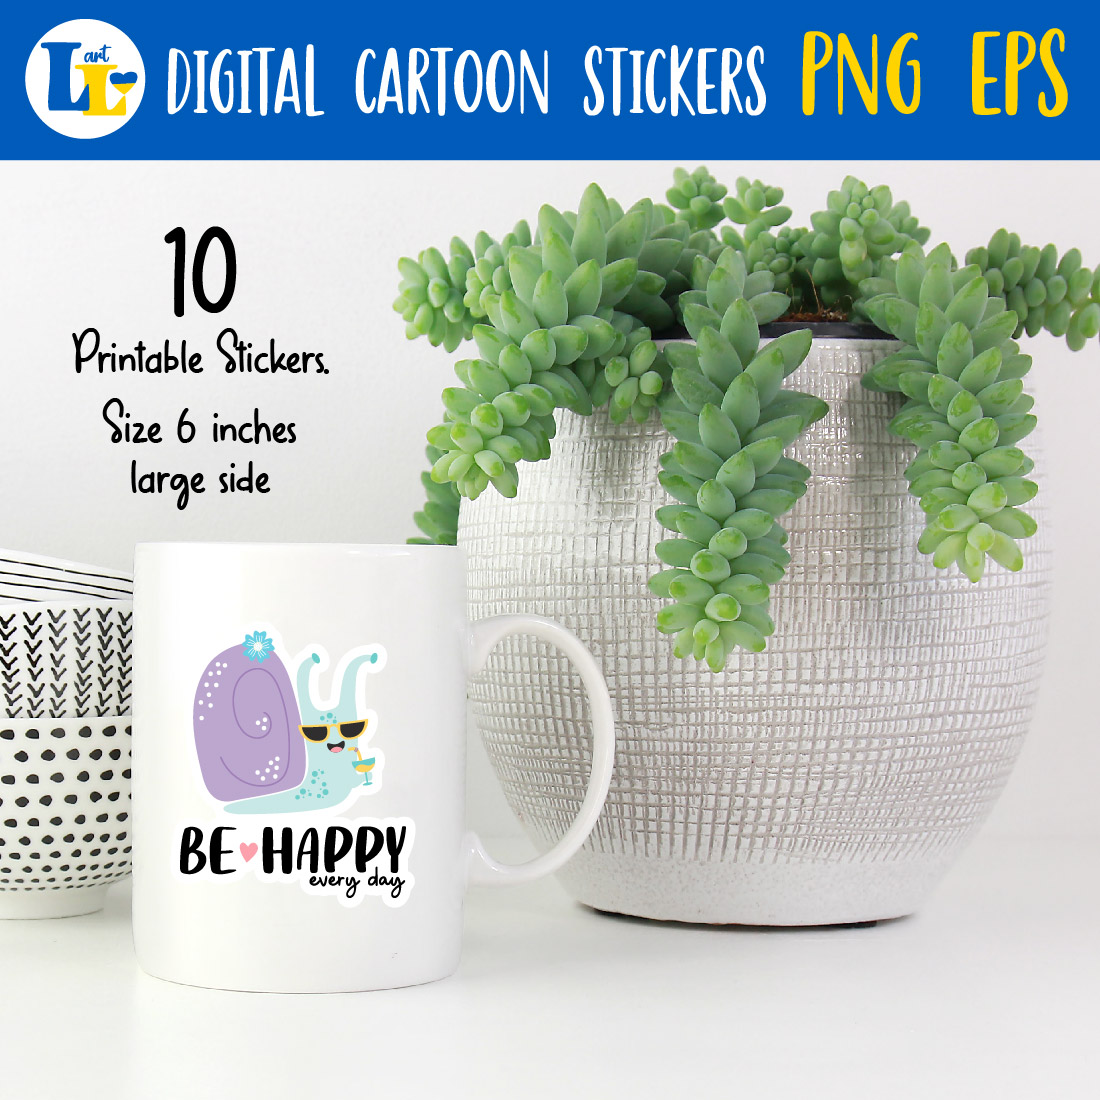 Cute Snails and Slogans Printable Digital Stickers previews.